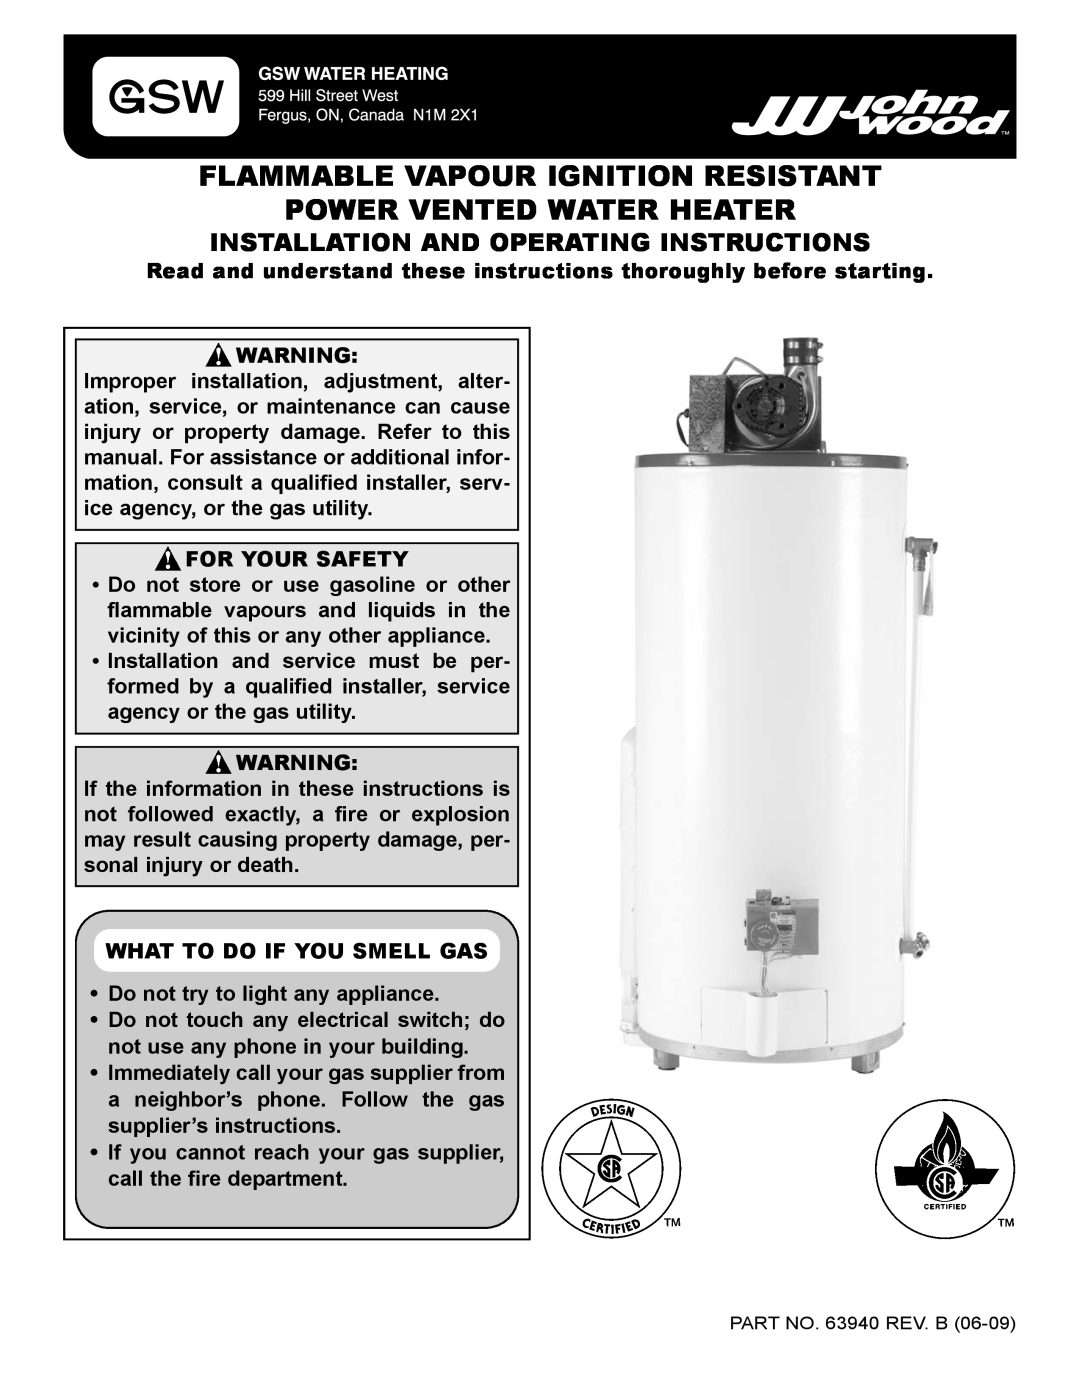 GSW 5065 manual Flammable Vapour Ignition Resistant, Power Vented Water Heater, Installation And Operating Instructions 